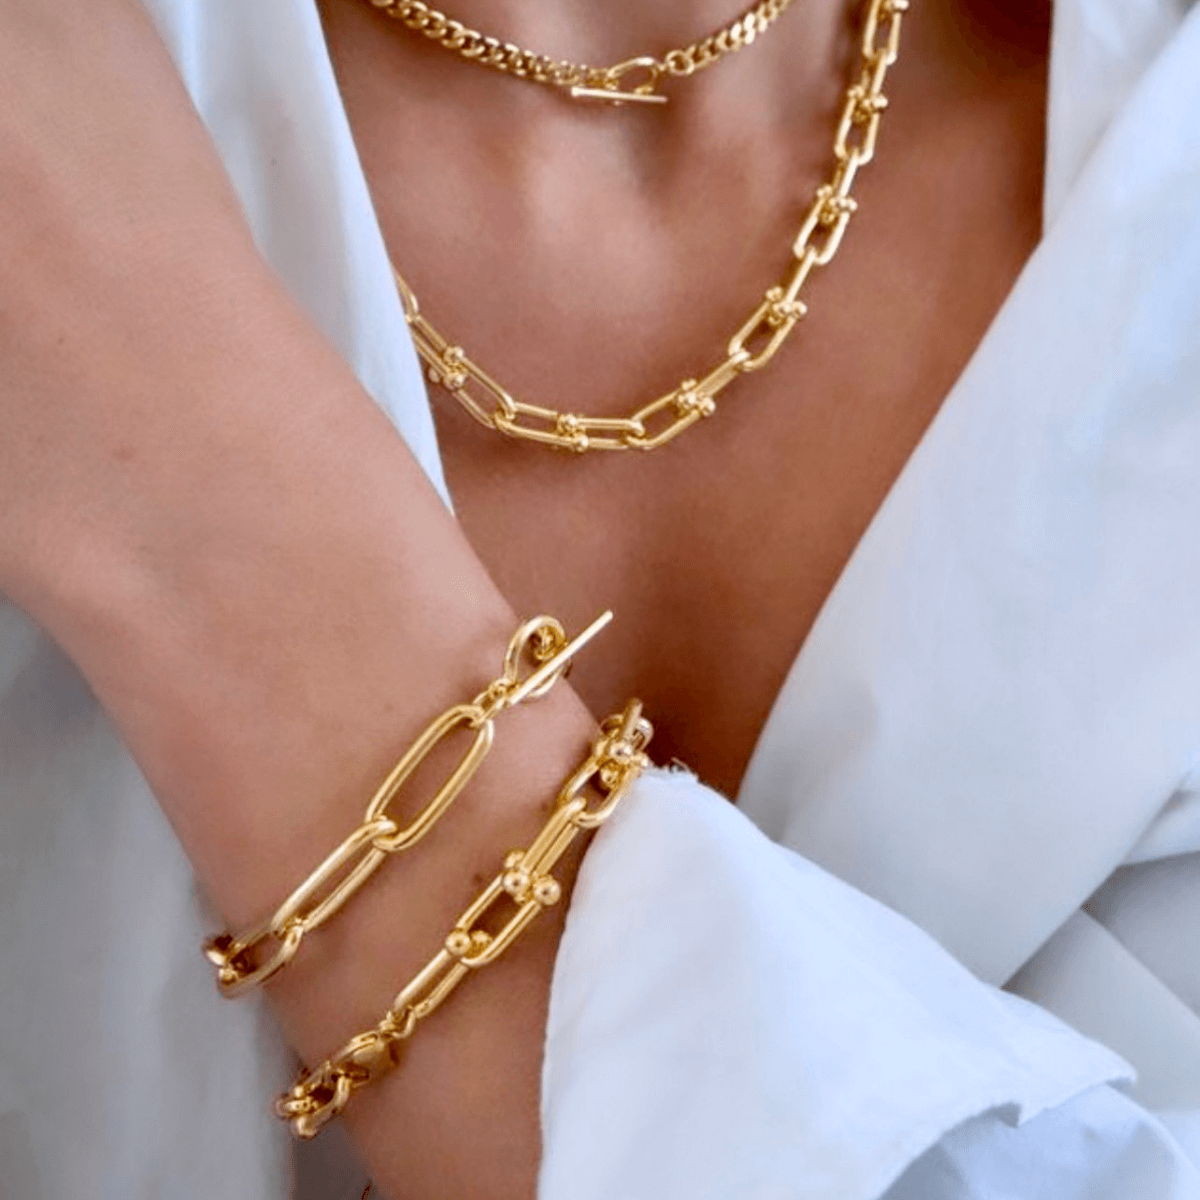 10 Tips of how to buy bracelets for girls - Amin Jewelers